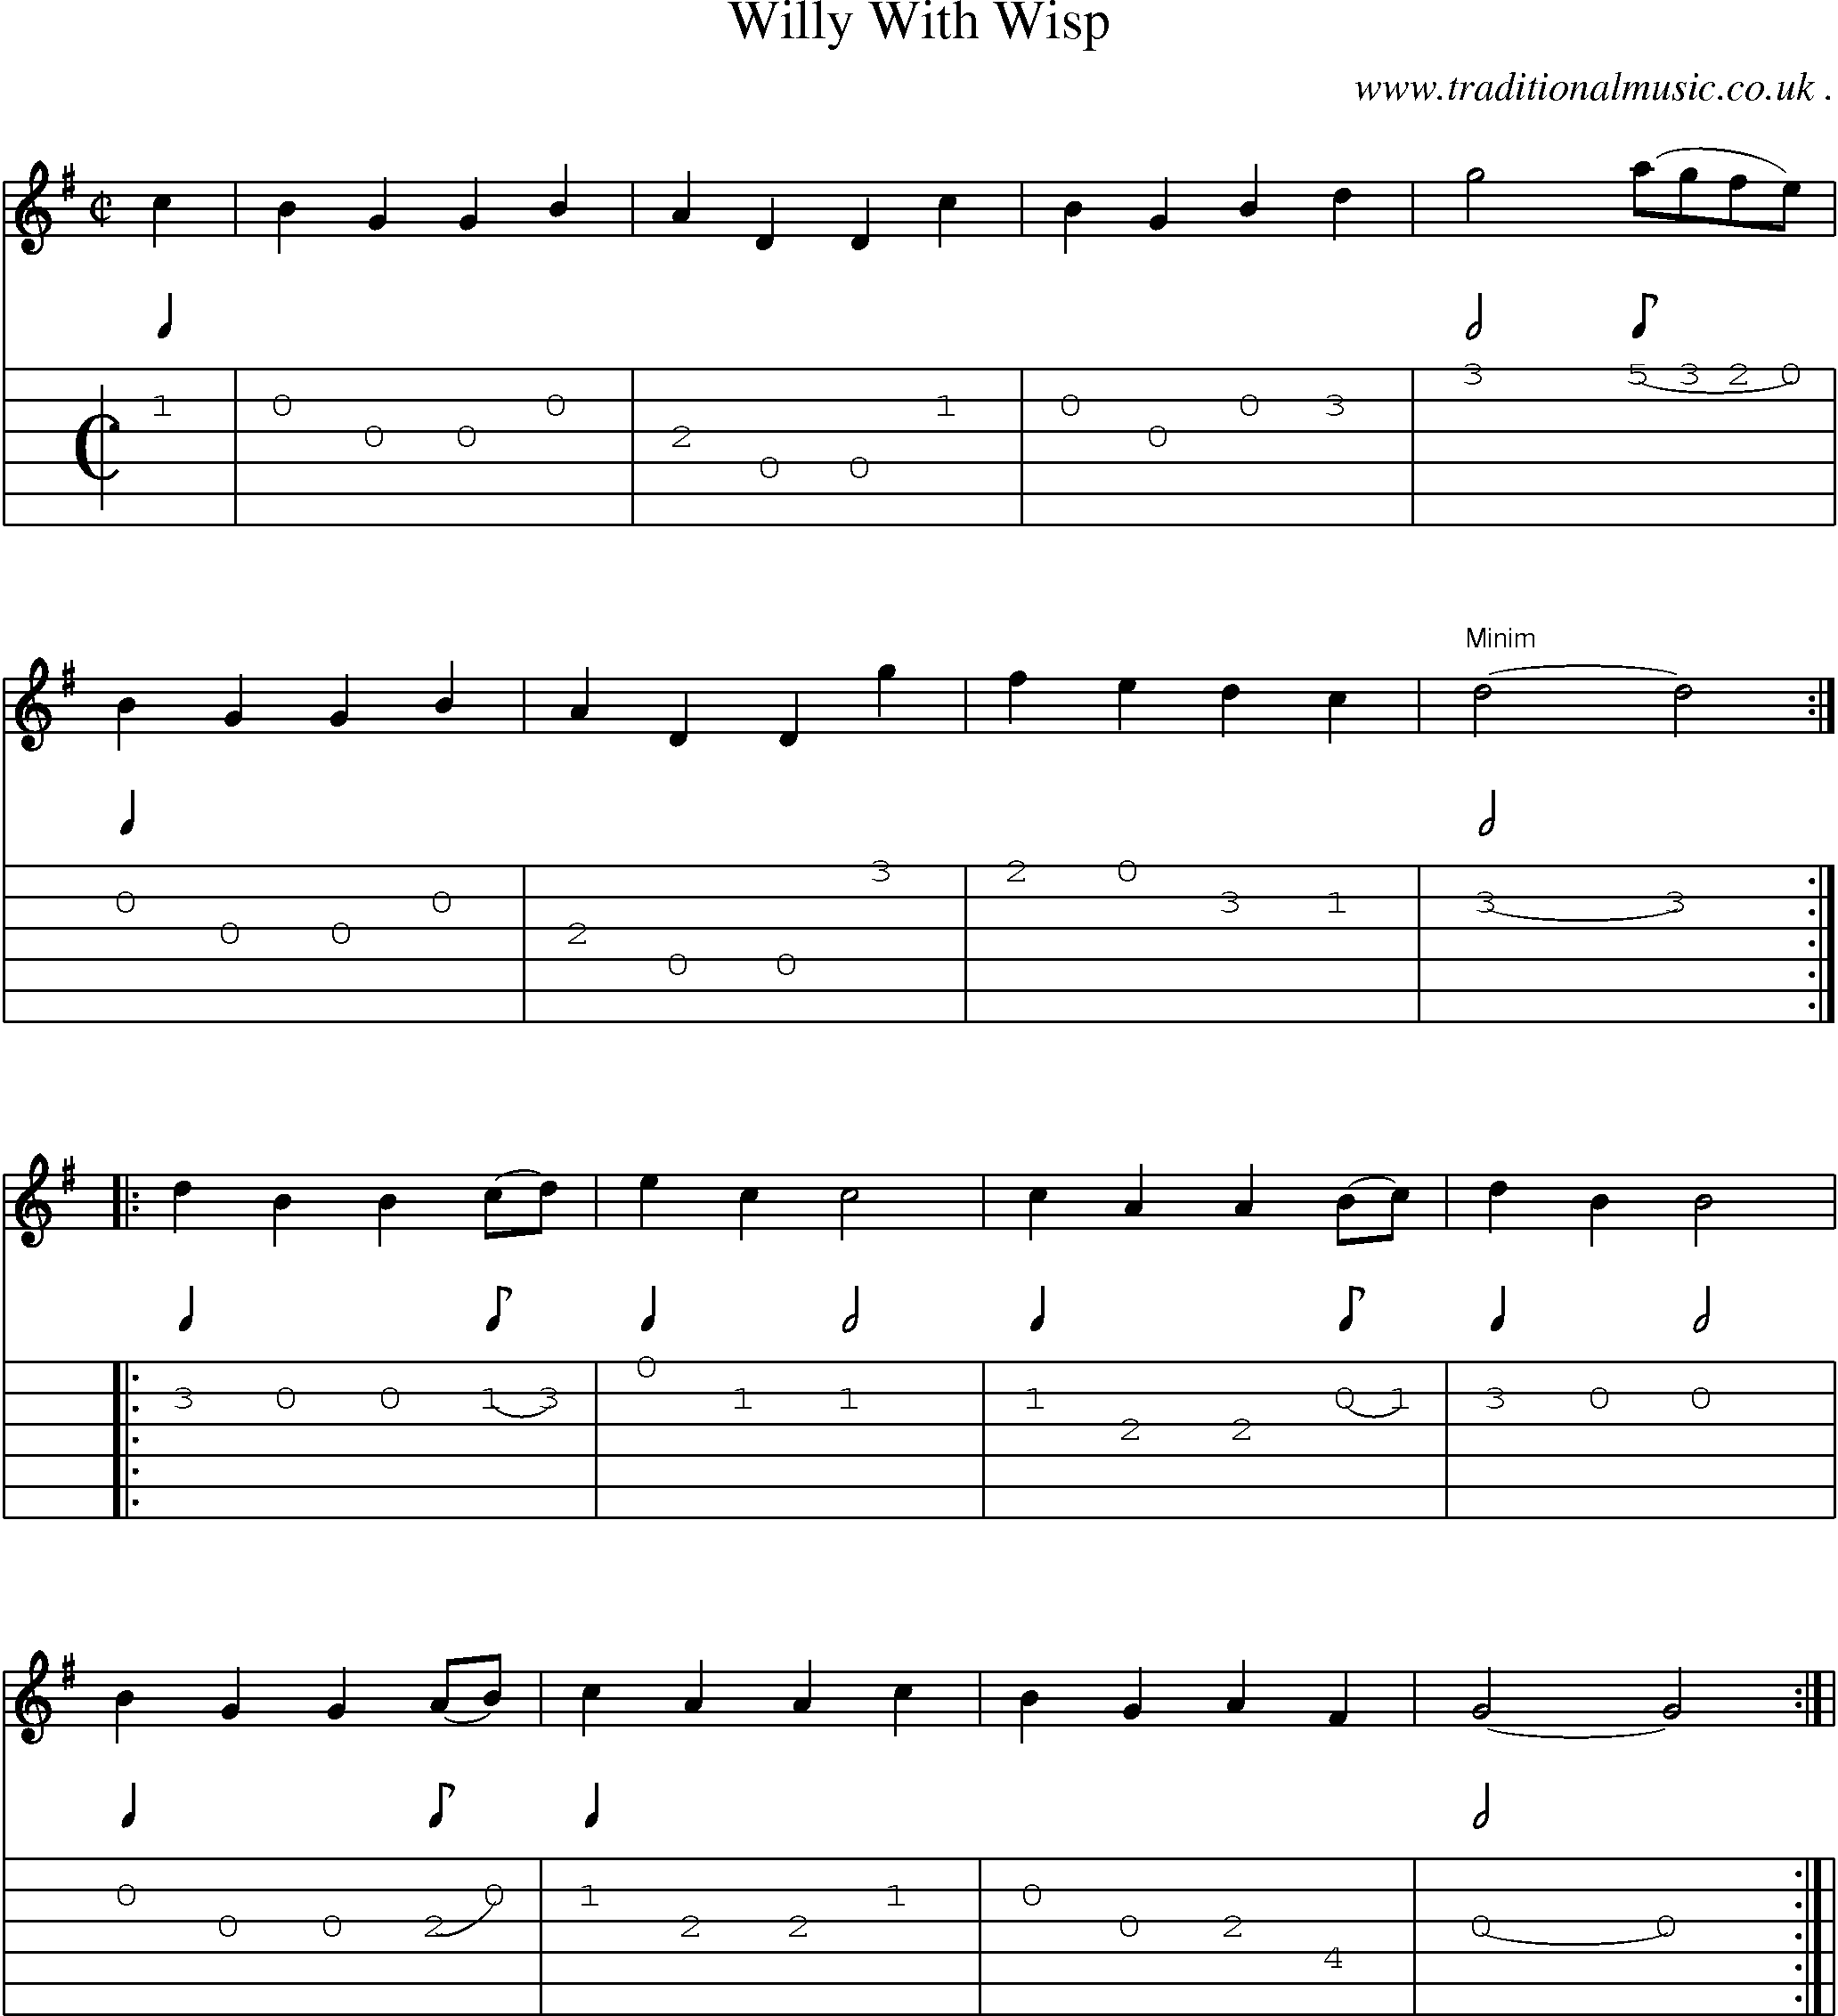 Sheet-Music and Guitar Tabs for Willy With Wisp